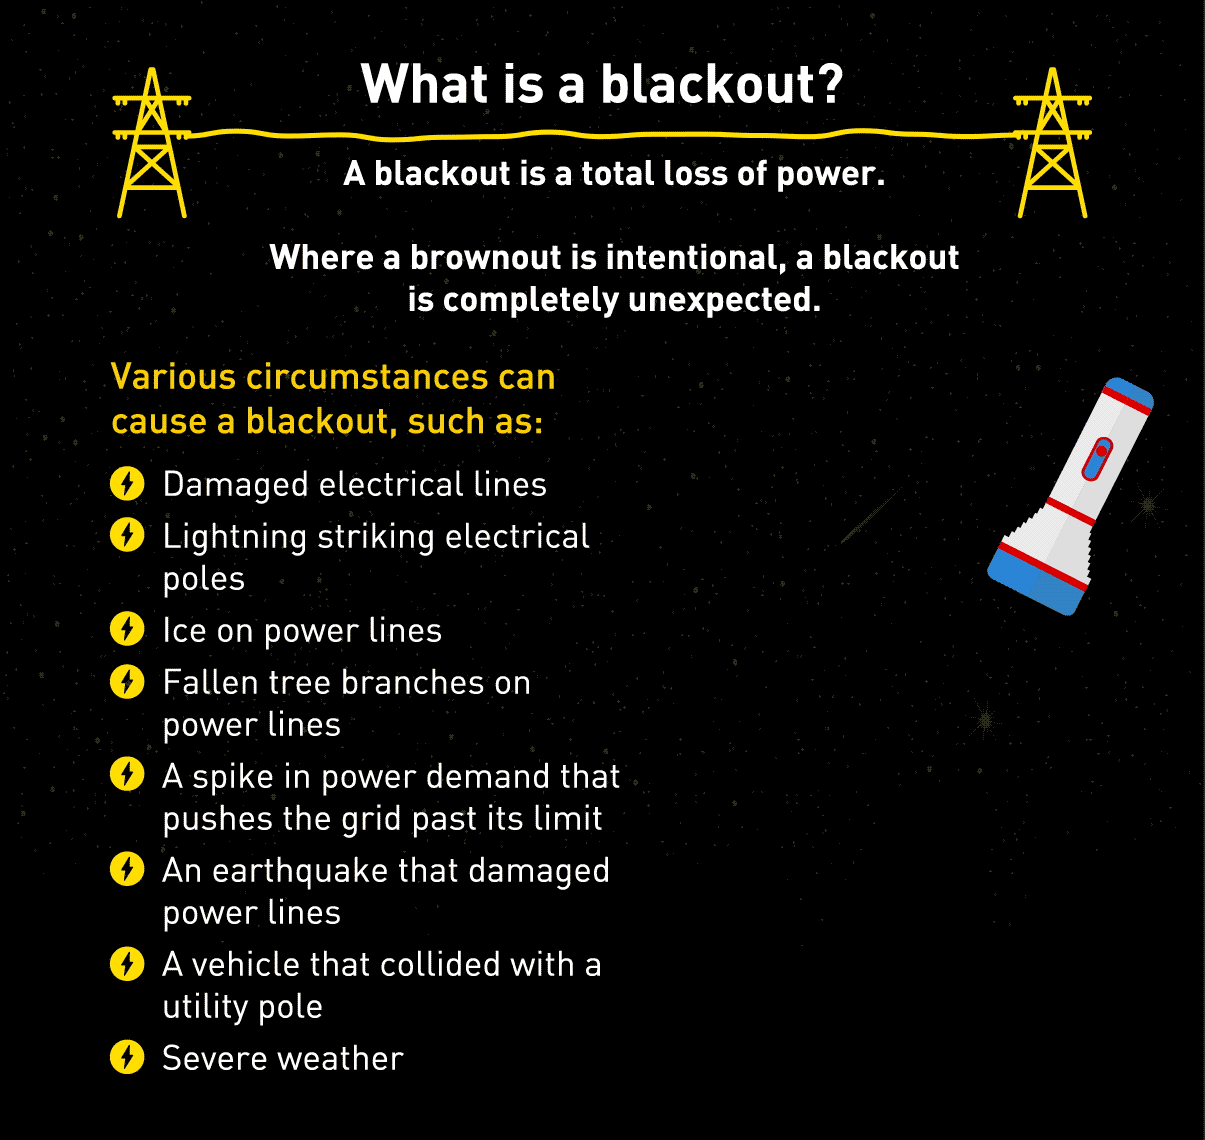 Graphic shows the circumstances and events that can result in a blackout